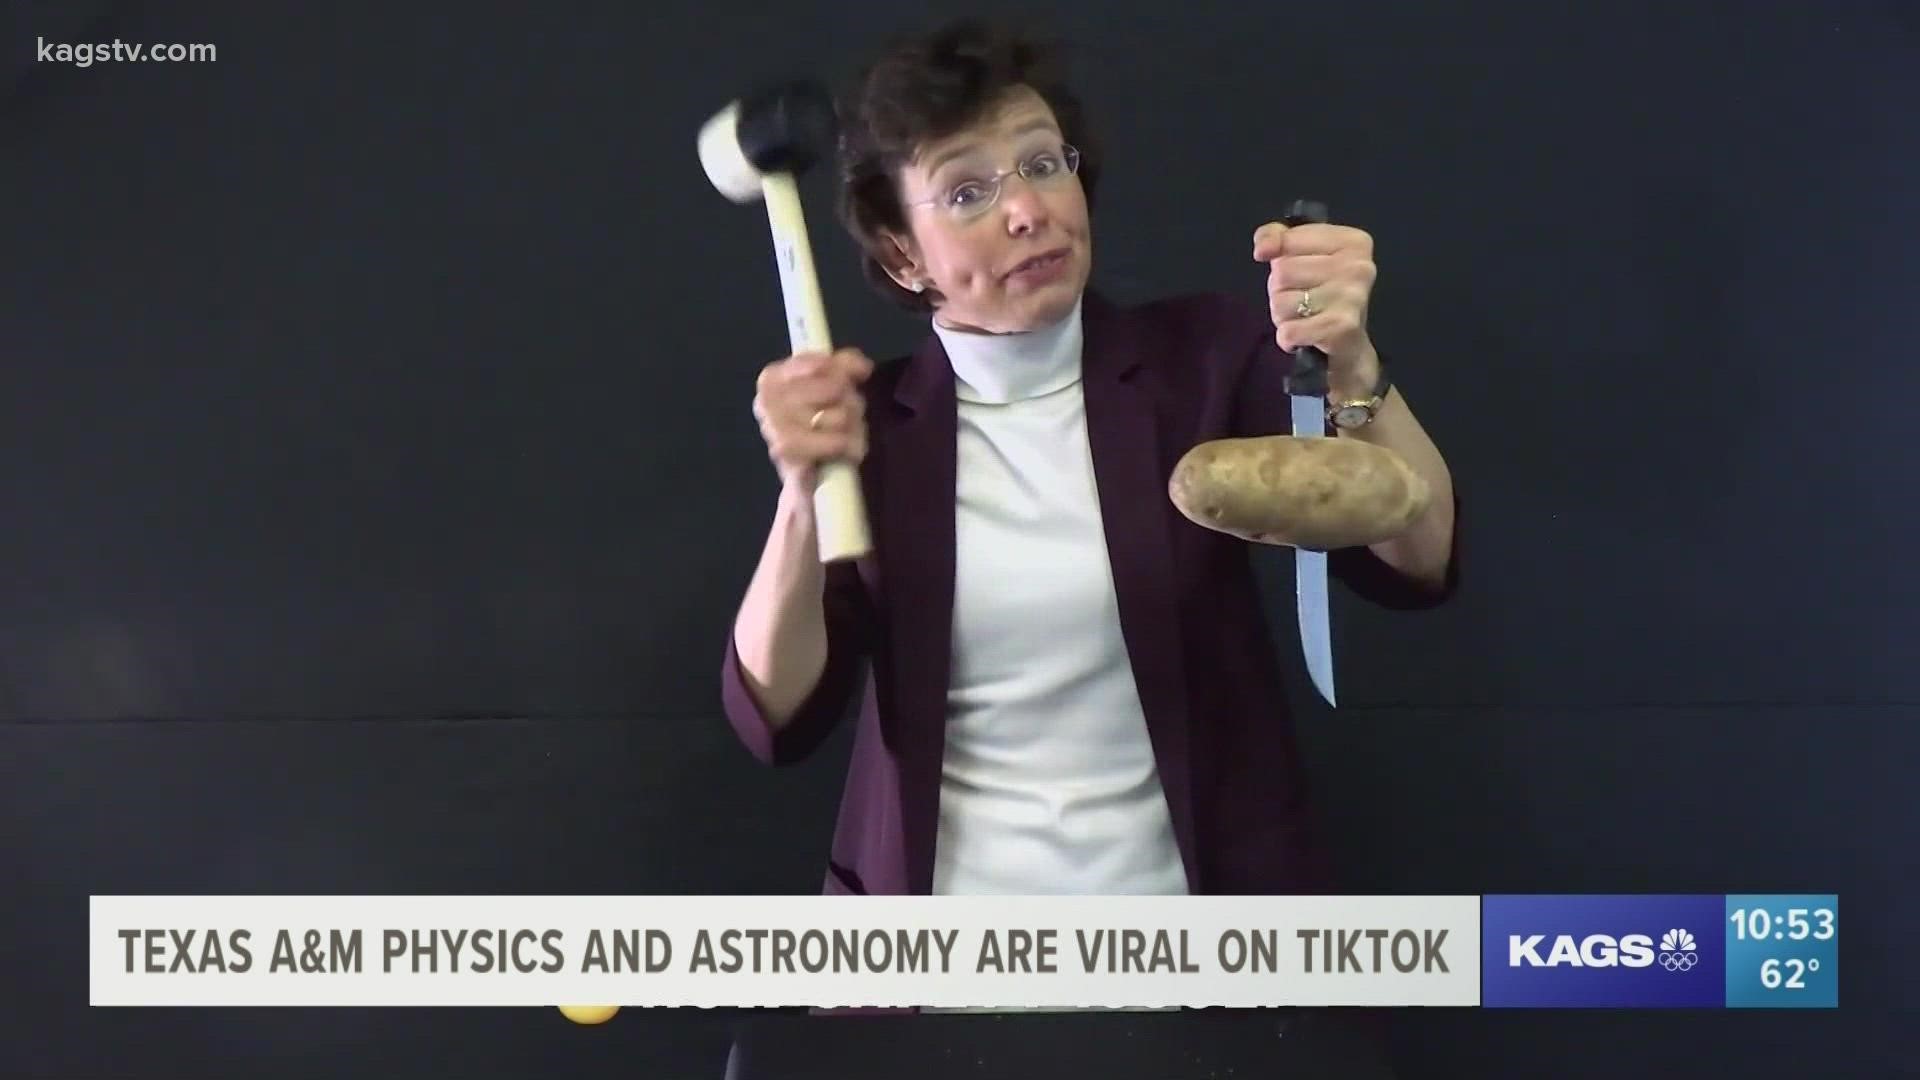 Move over Aggie Football. Texas A&M's Physics & Astronomy Department reigns on TikTok with its videos totaling more than 32 million views.